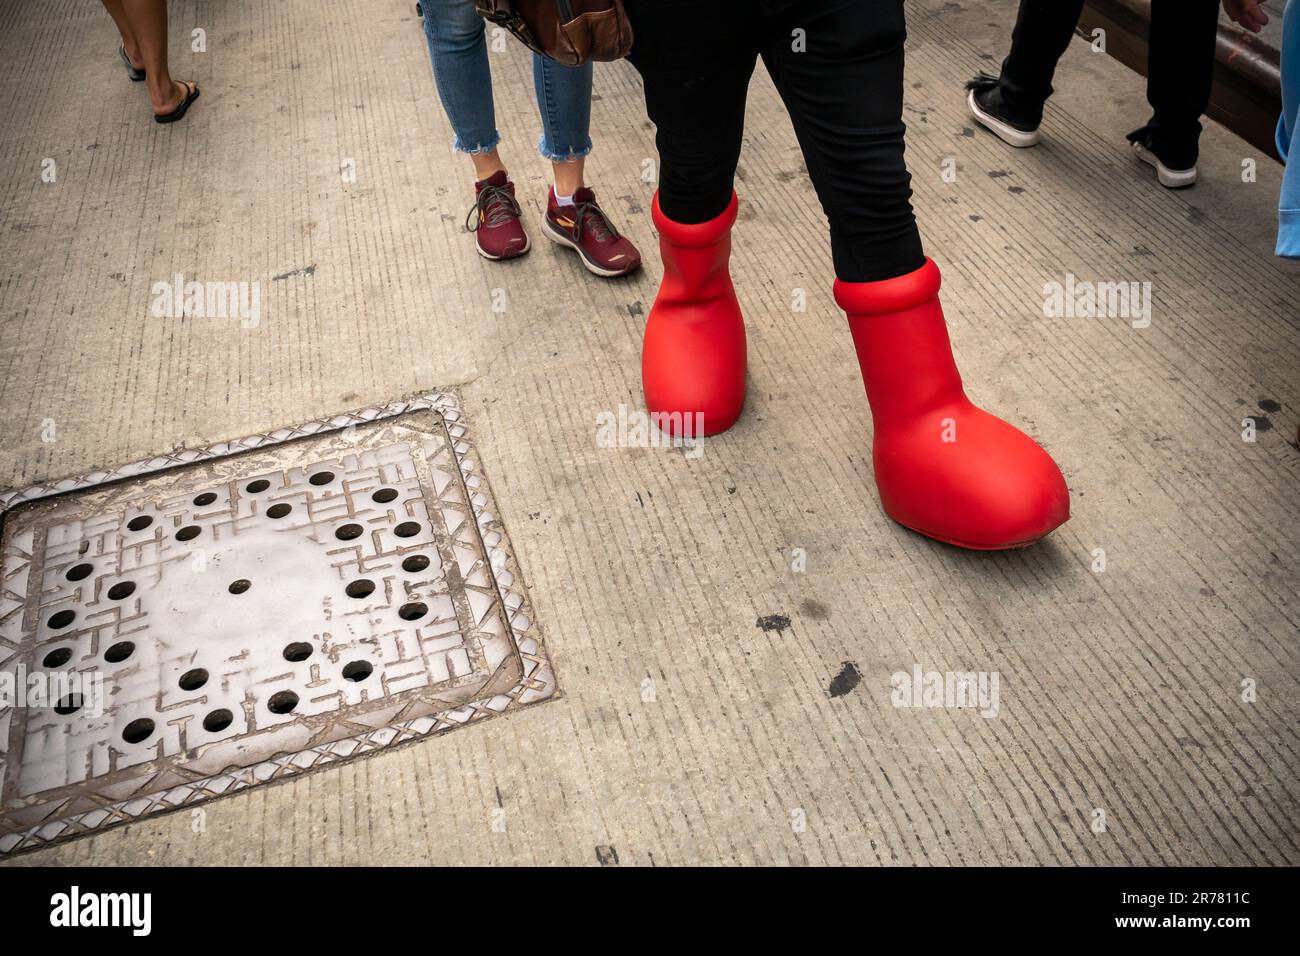 A Writers Guild of America East striker wears a pair of anime inspired boots created by MSCHF, a collective that parodies popular culture. The boots made their debut last February and have faded from social media and popular culture since then. (© Richard B. Levine) Stock Photo